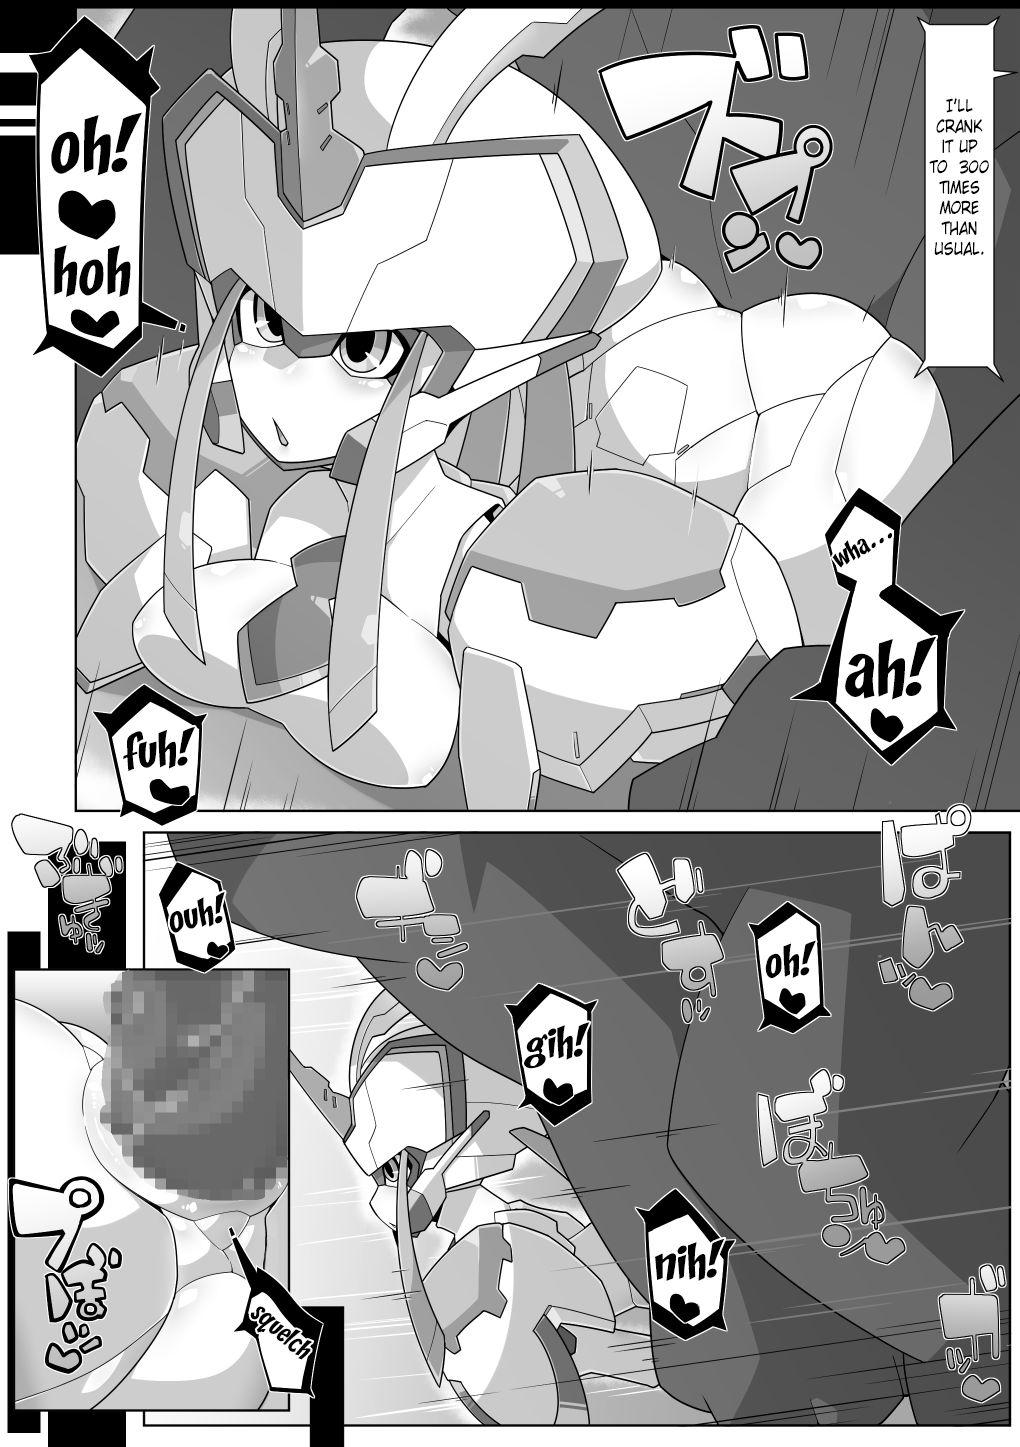 Gay Boys (C94) [Workaholic (Kni)] robo-hentai-book - Darling in the franxx Affair - Page 4